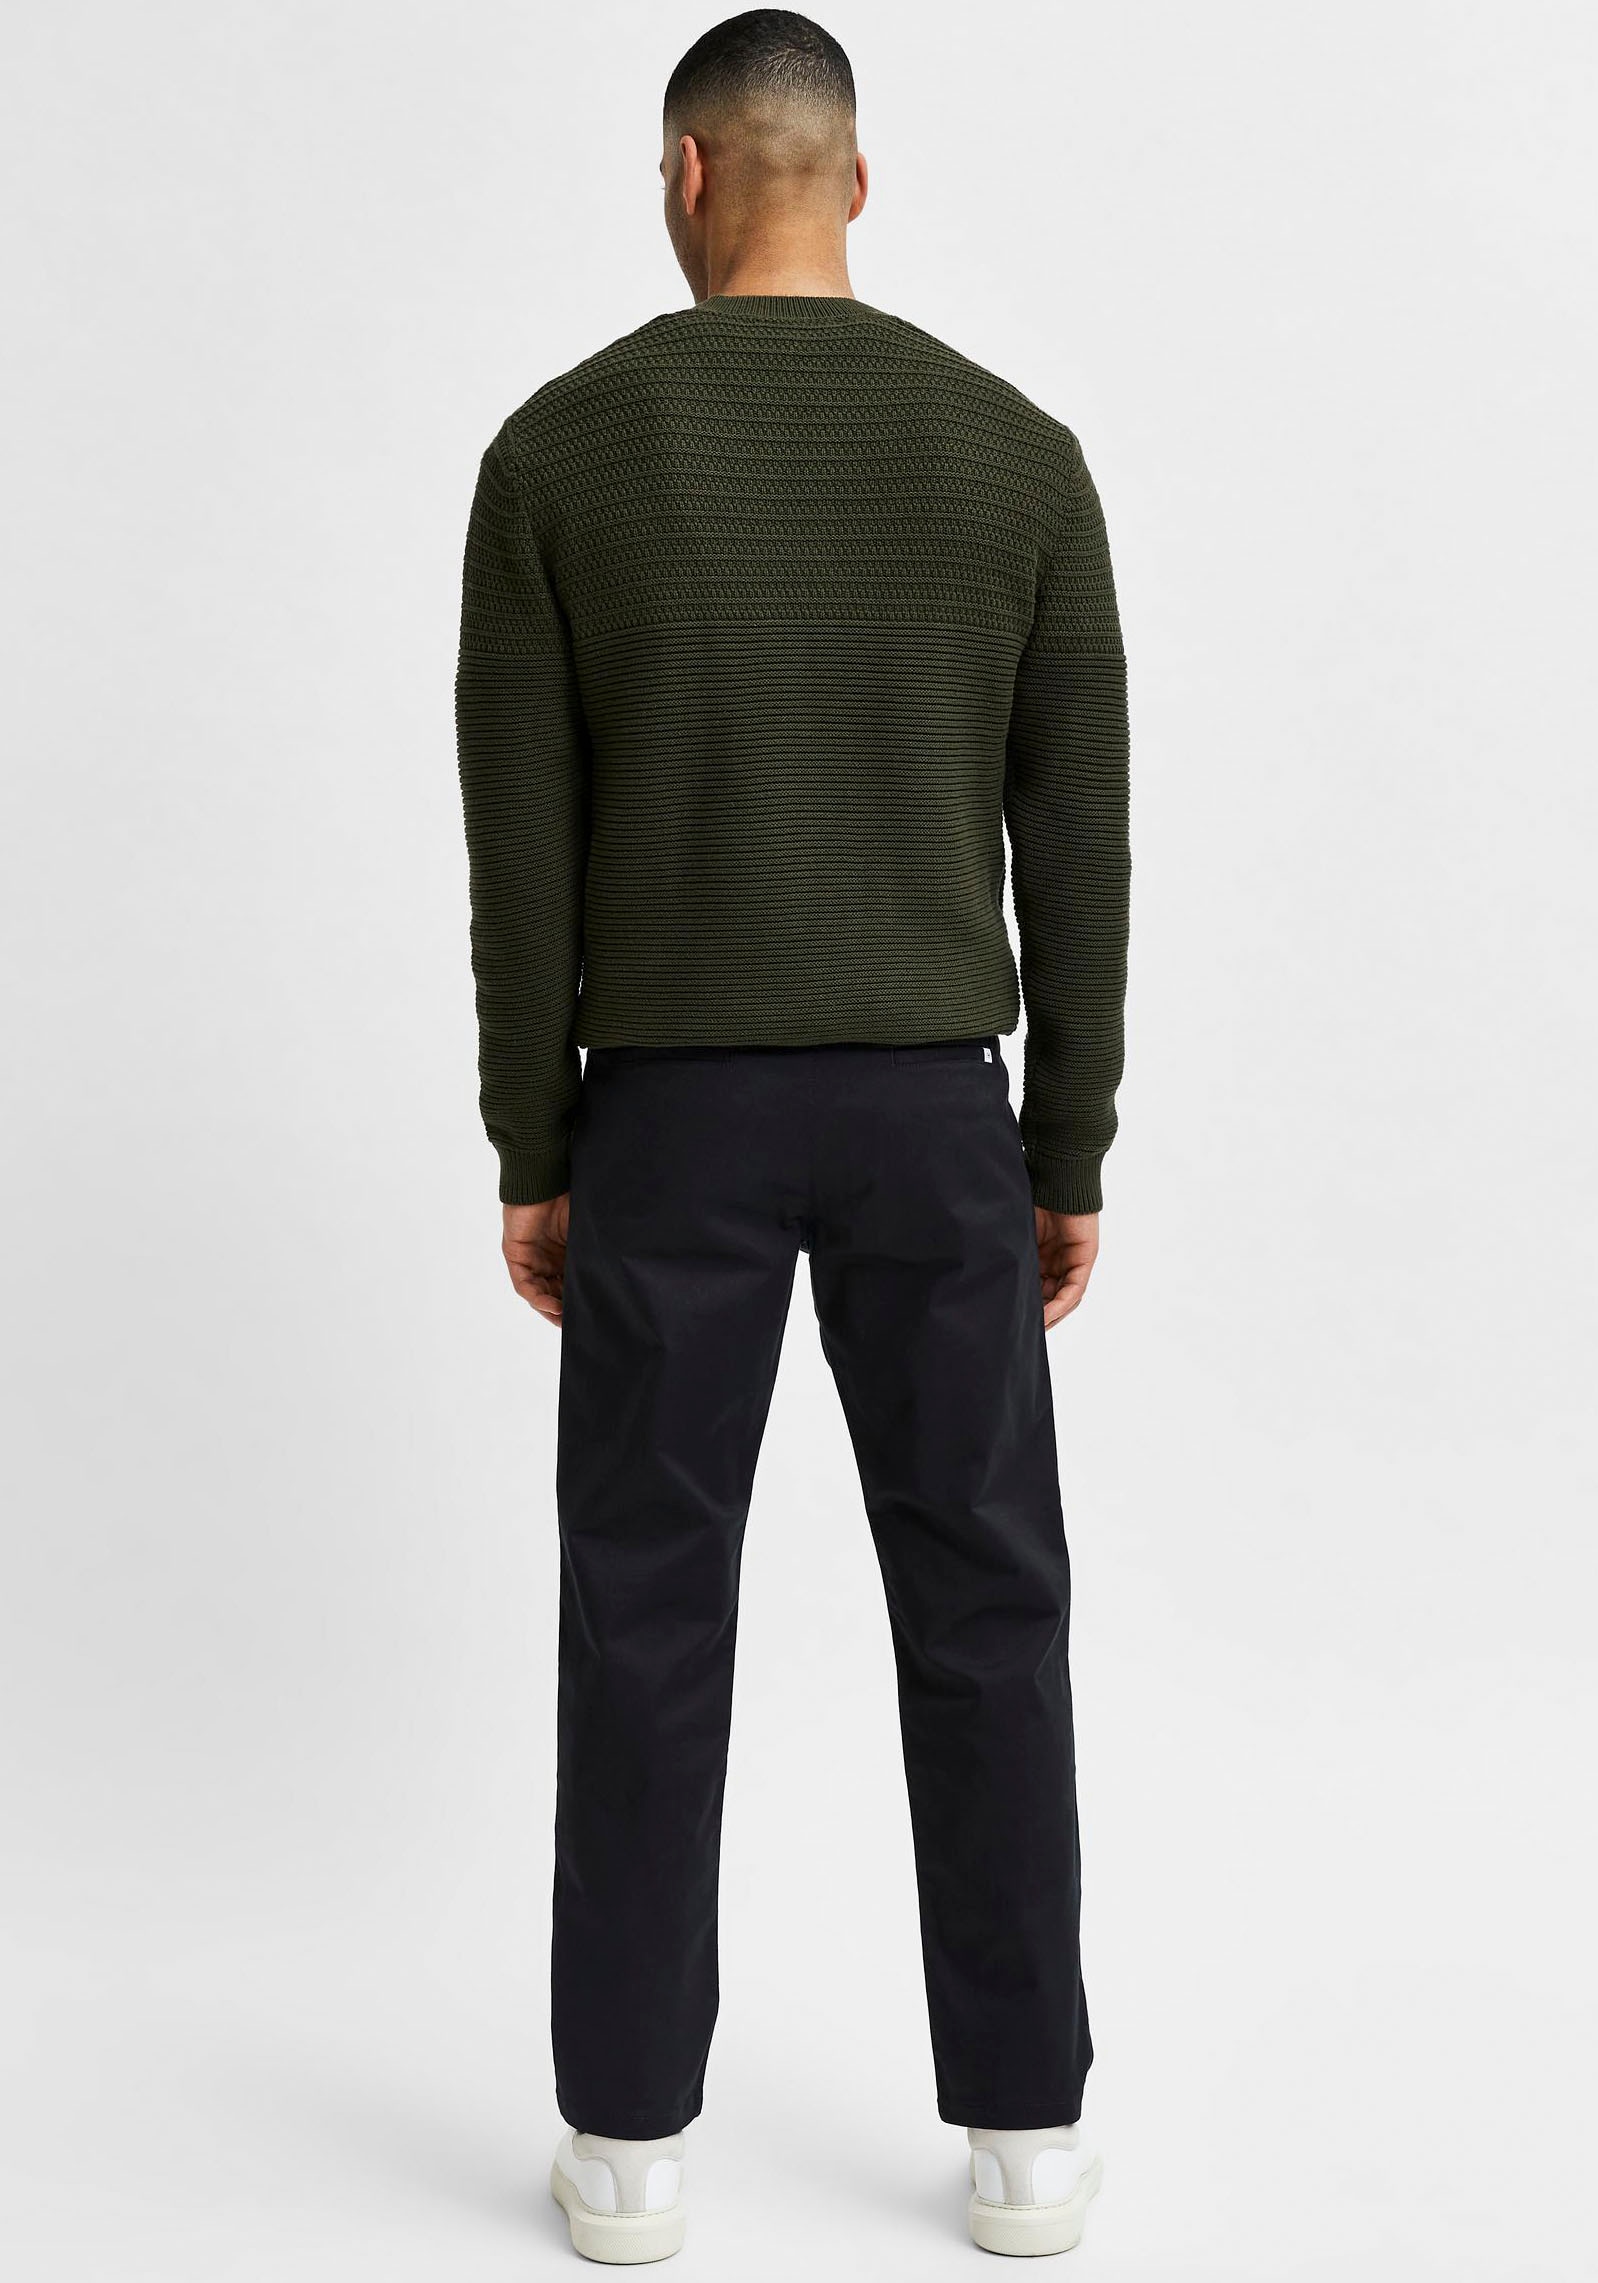 bestellen SELECTED OTTO bei Chinohose online »SE HOMME Chino«